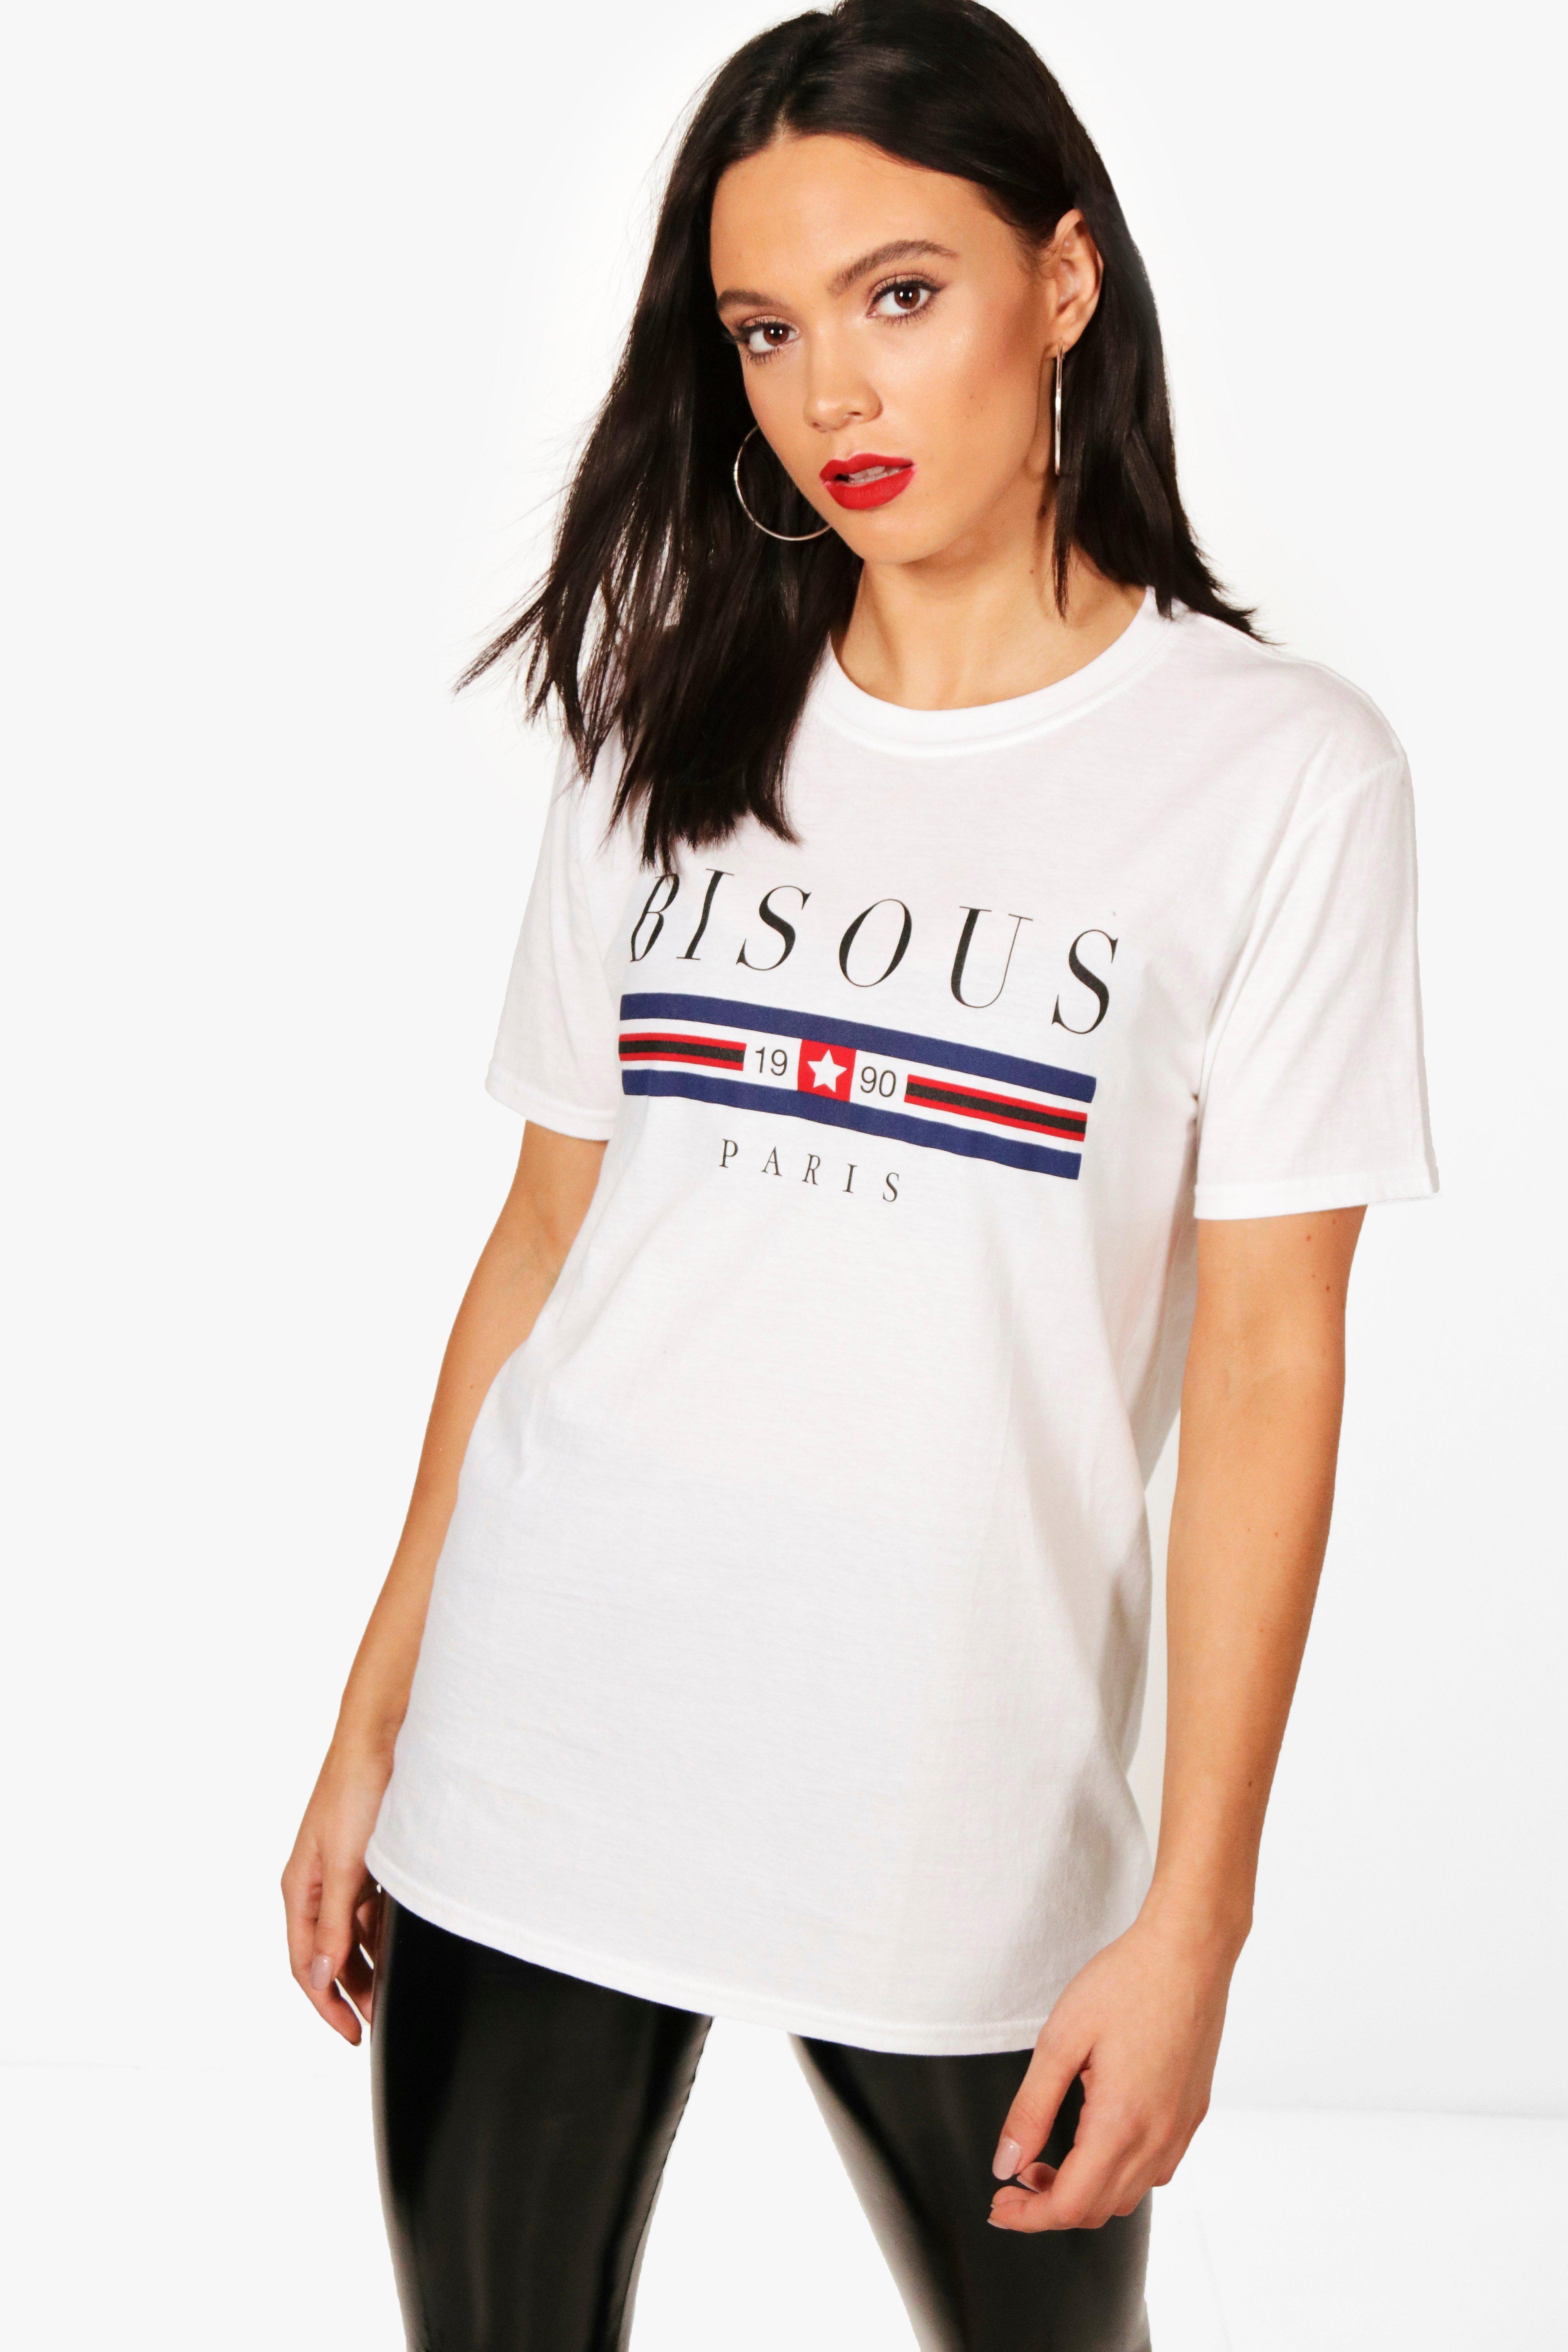 Tall Becca Bisous Paris French Slogan | Boohoo